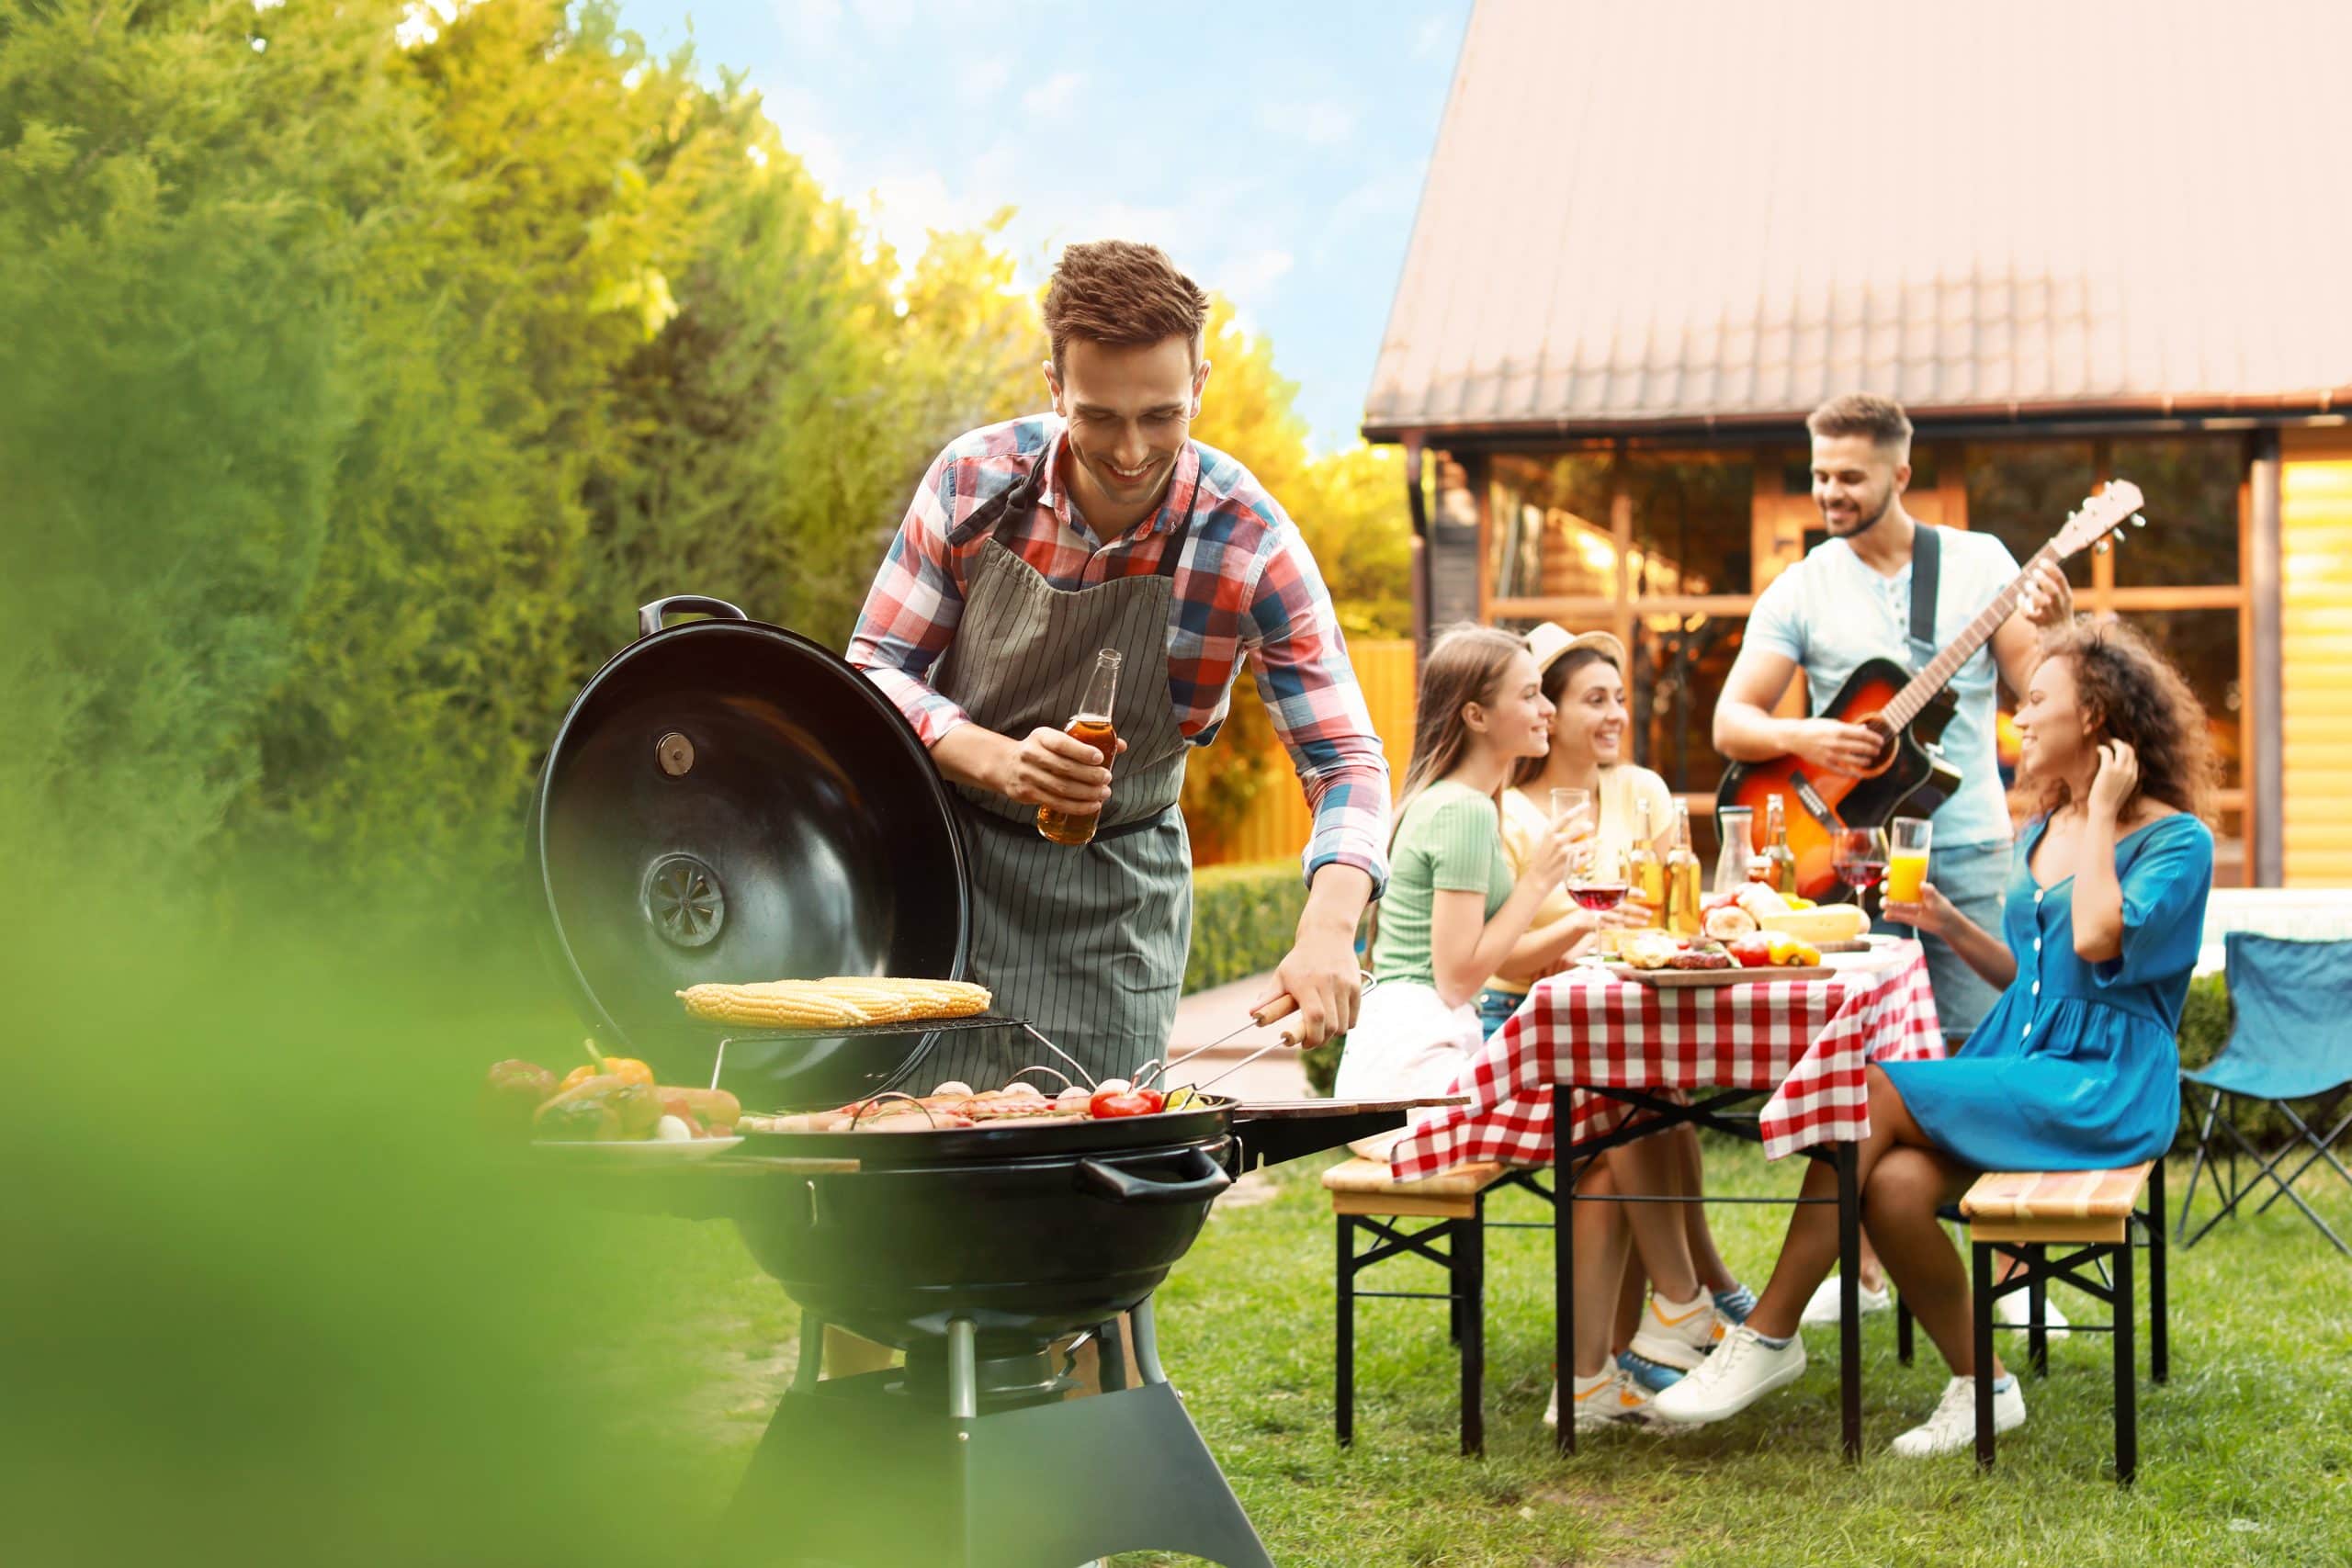 How to choose the best grill? We suggest!